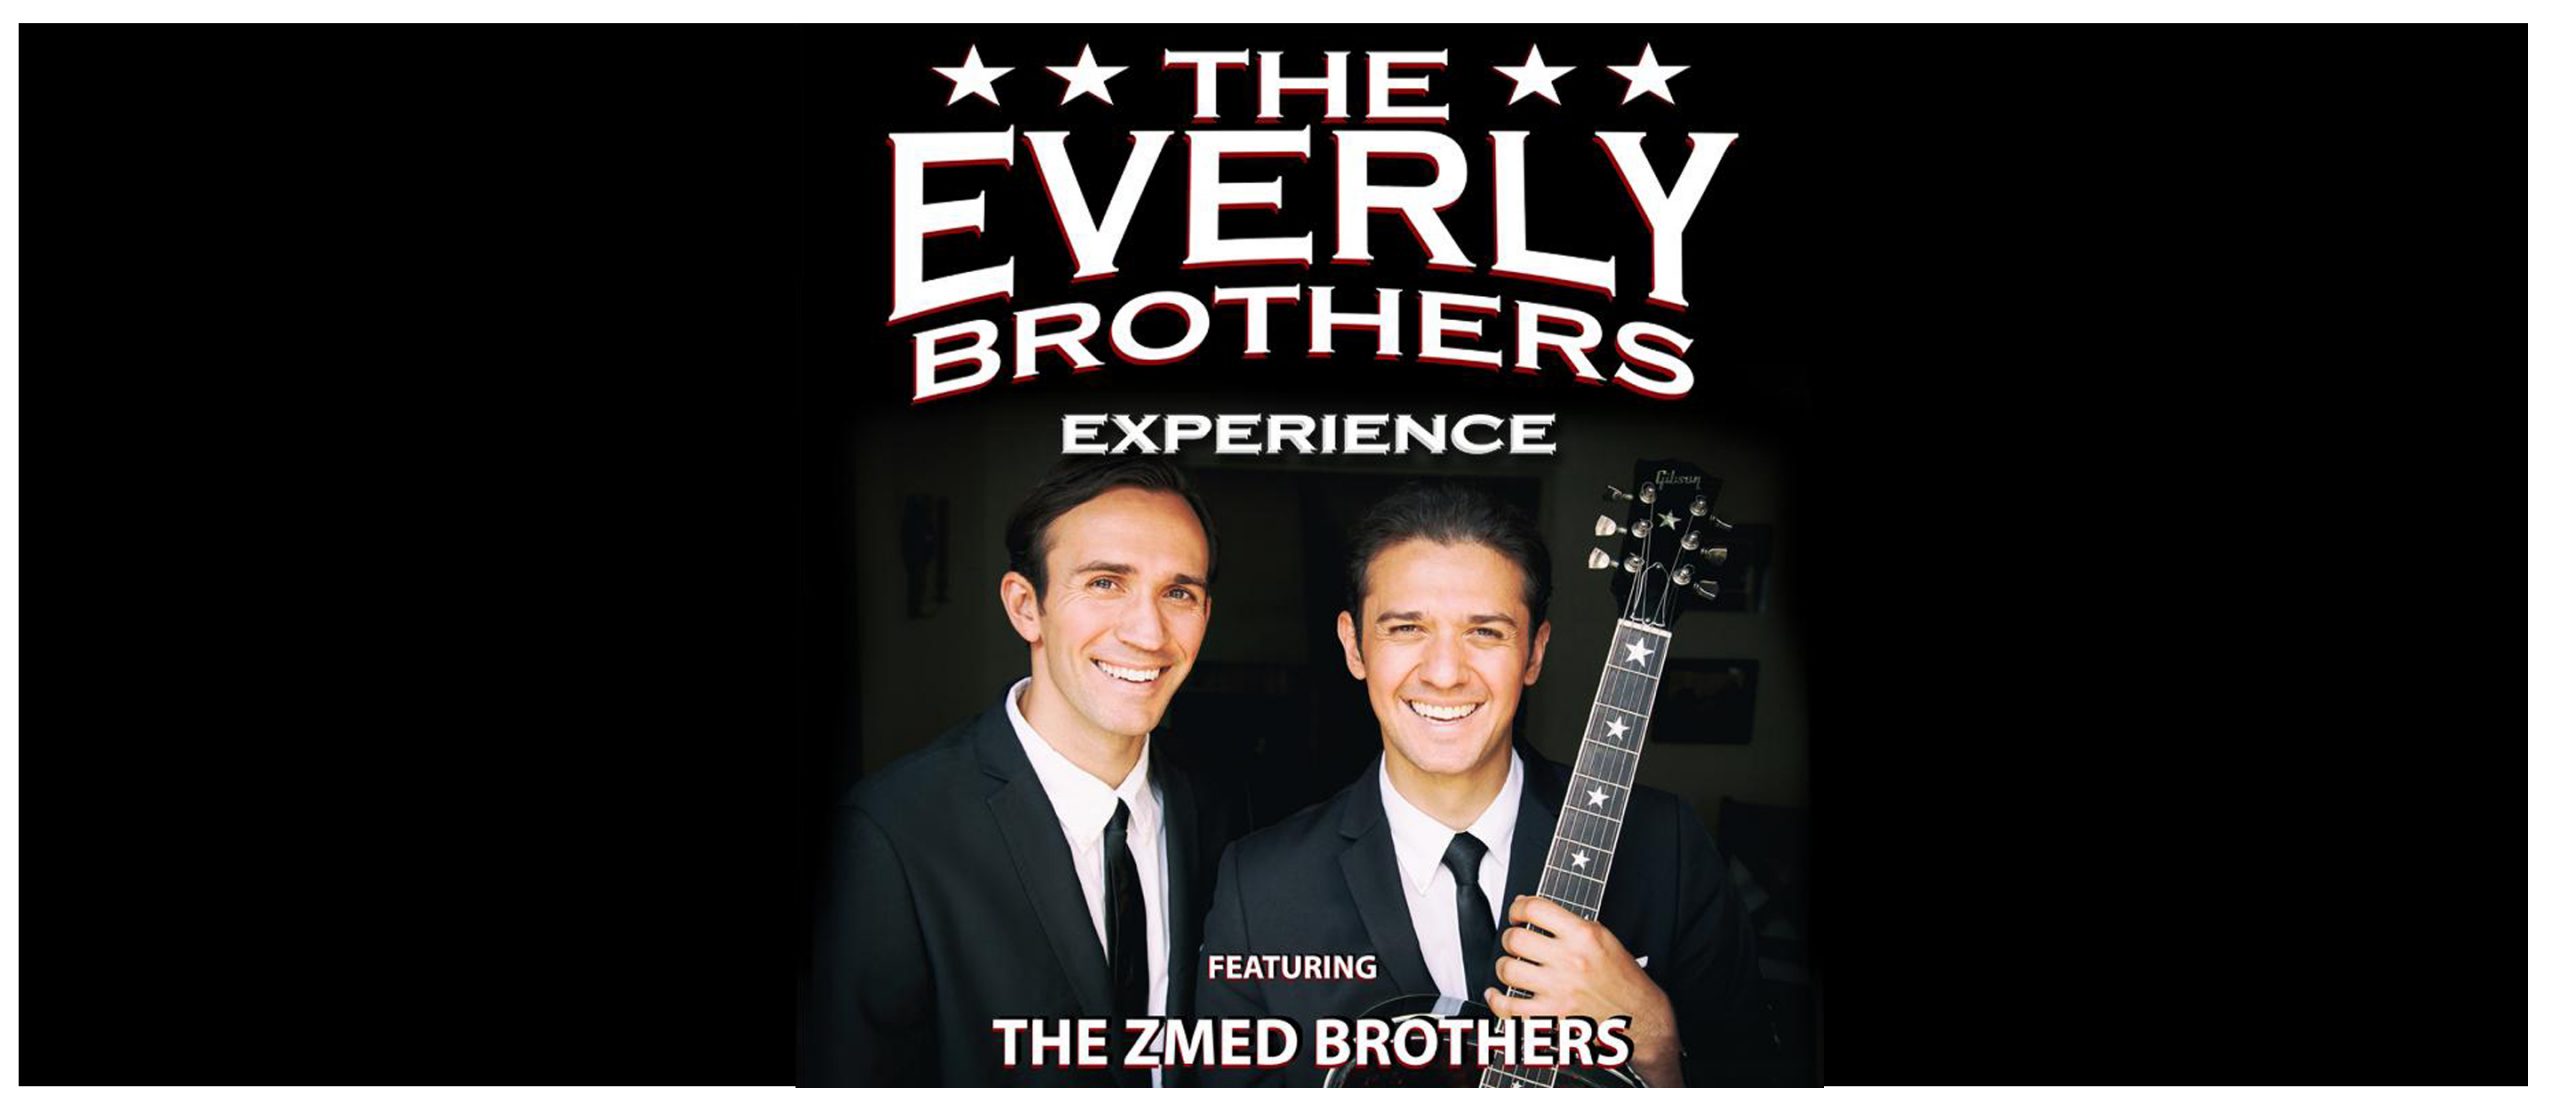 The Everly Brothers Experience ft. The Zmed Brothers